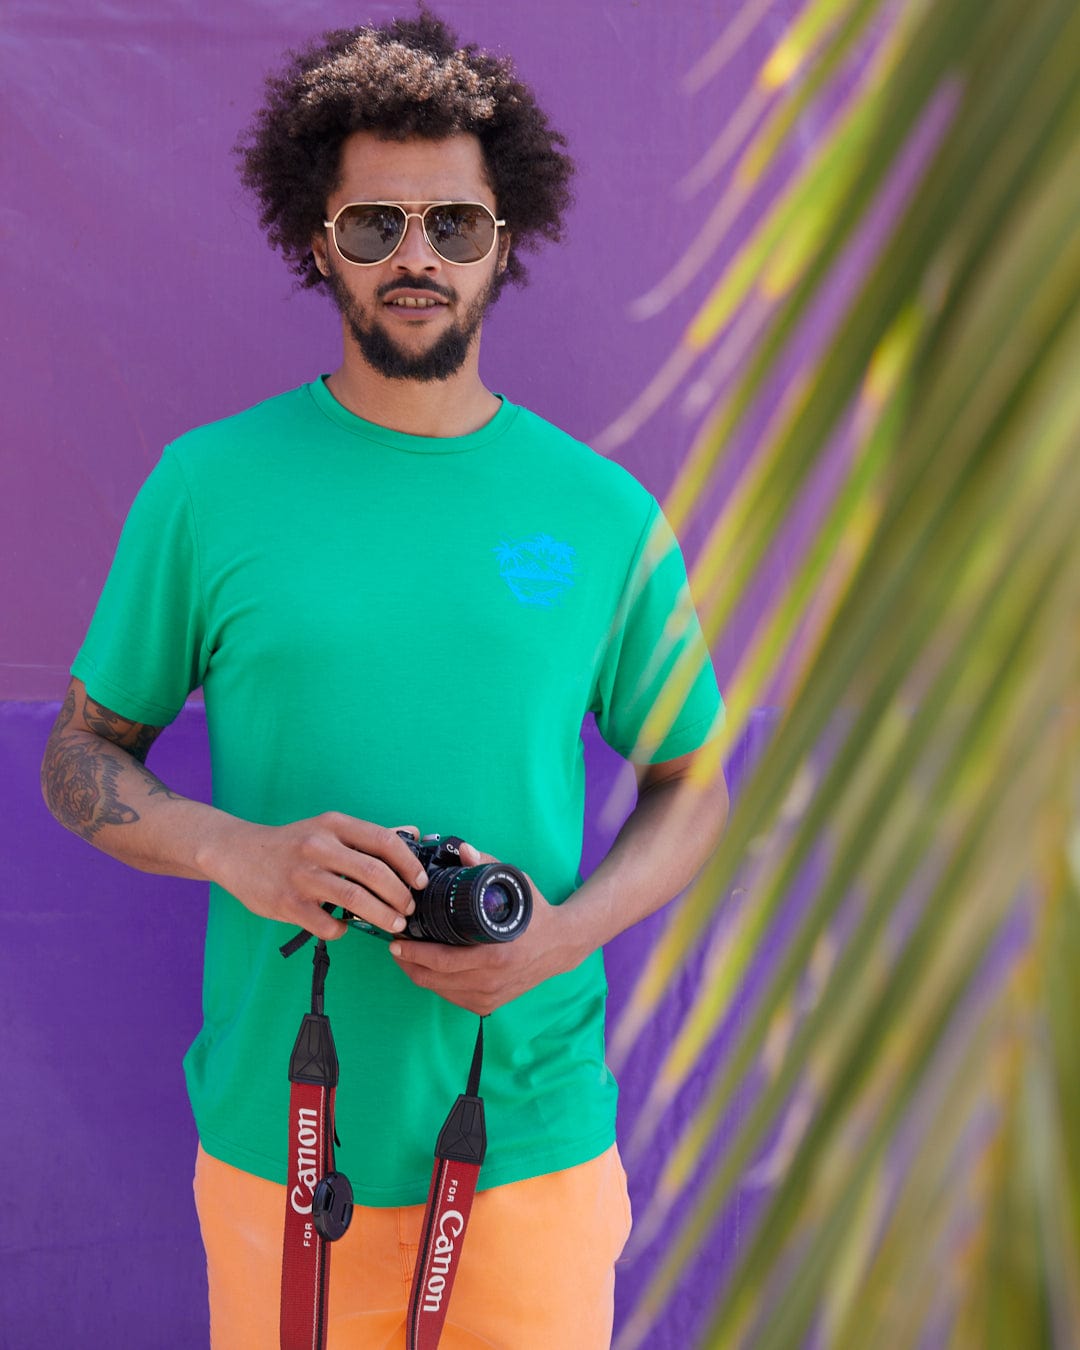 A man with curly hair wearing sunglasses, a Geo Palms Solid - Mens Recycled Hybrid T-Shirt - Green by Saltrock with a cotton soft hand feel, and orange shorts holds a Canon camera. A large palm leaf is in the foreground, evoking Palm beach graphics vibes. The background wall is purple.